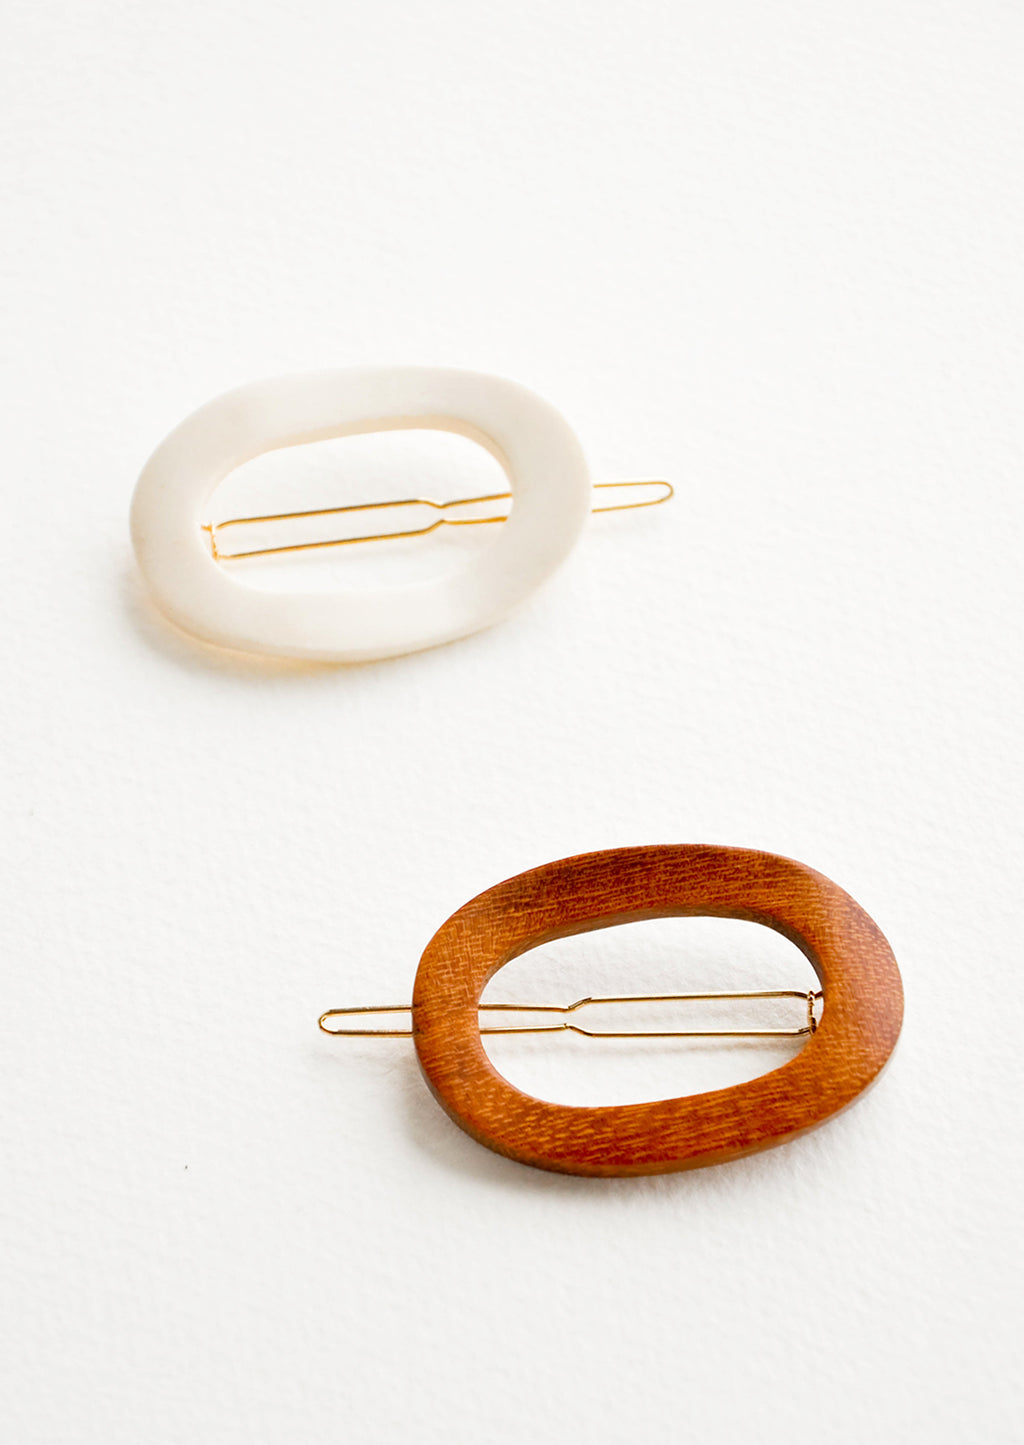 4: One brown and one white oval shaped hair clip